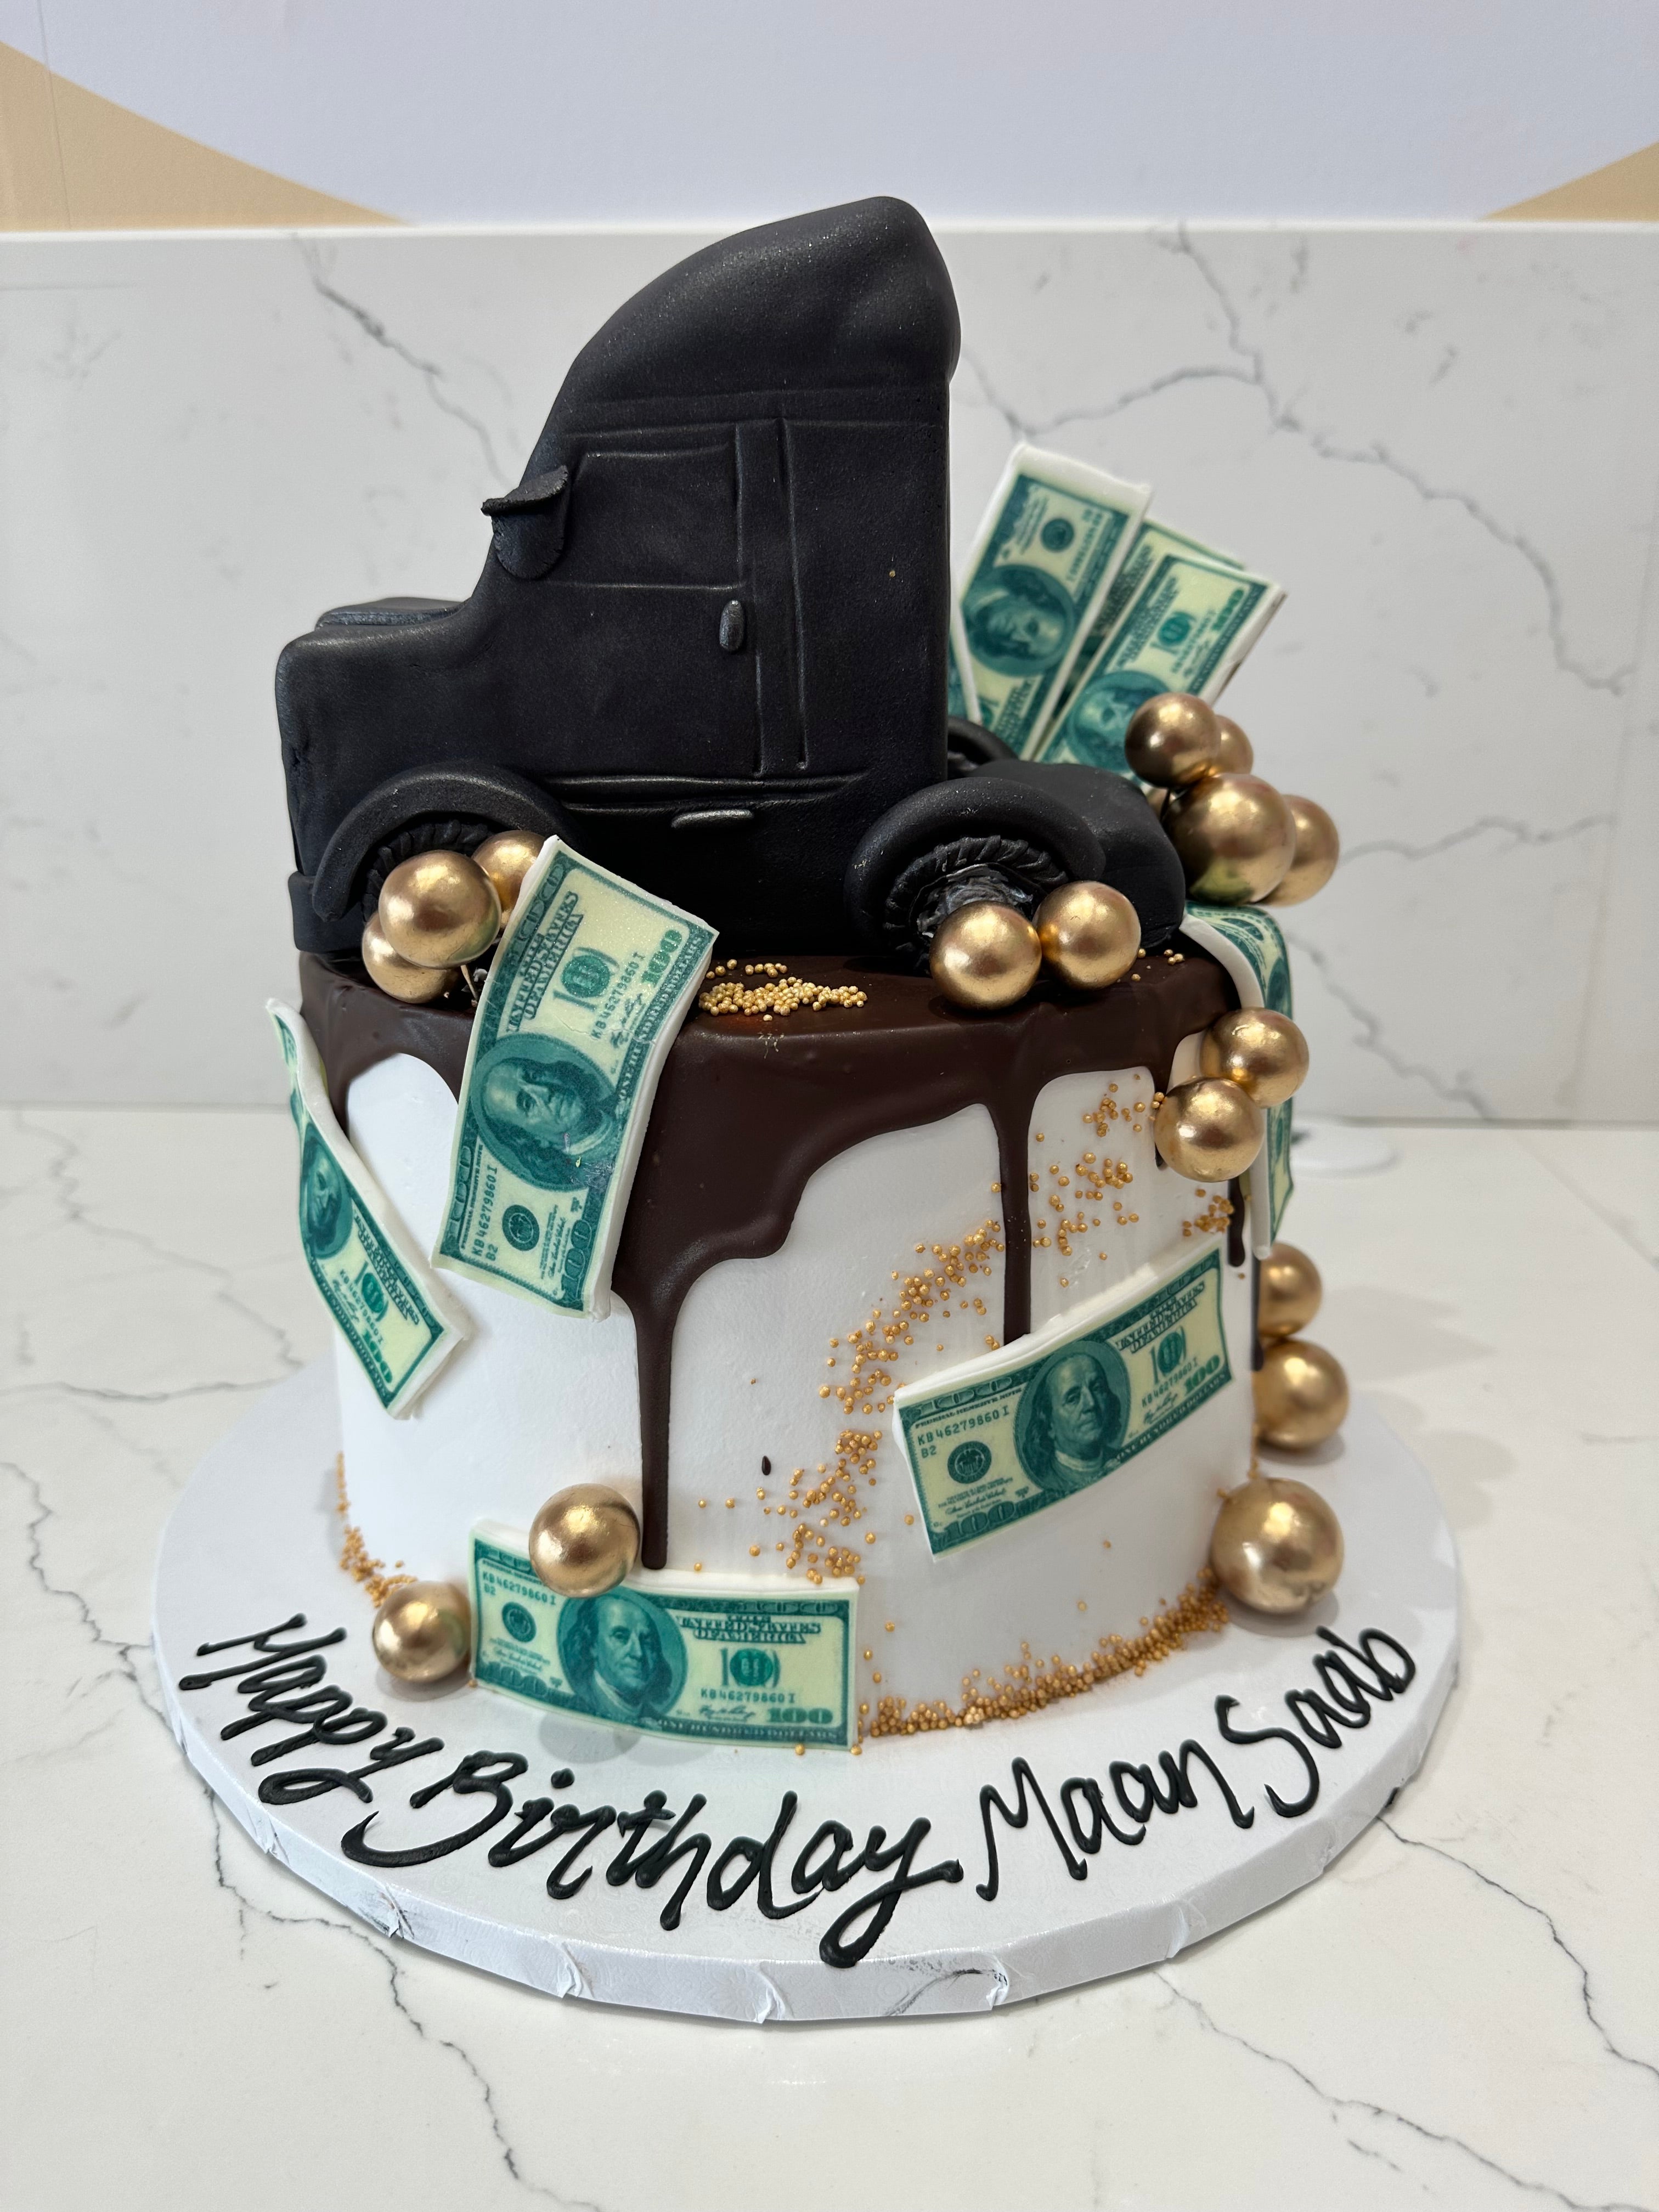 Creative Edible Money Cake with Gold and Cash